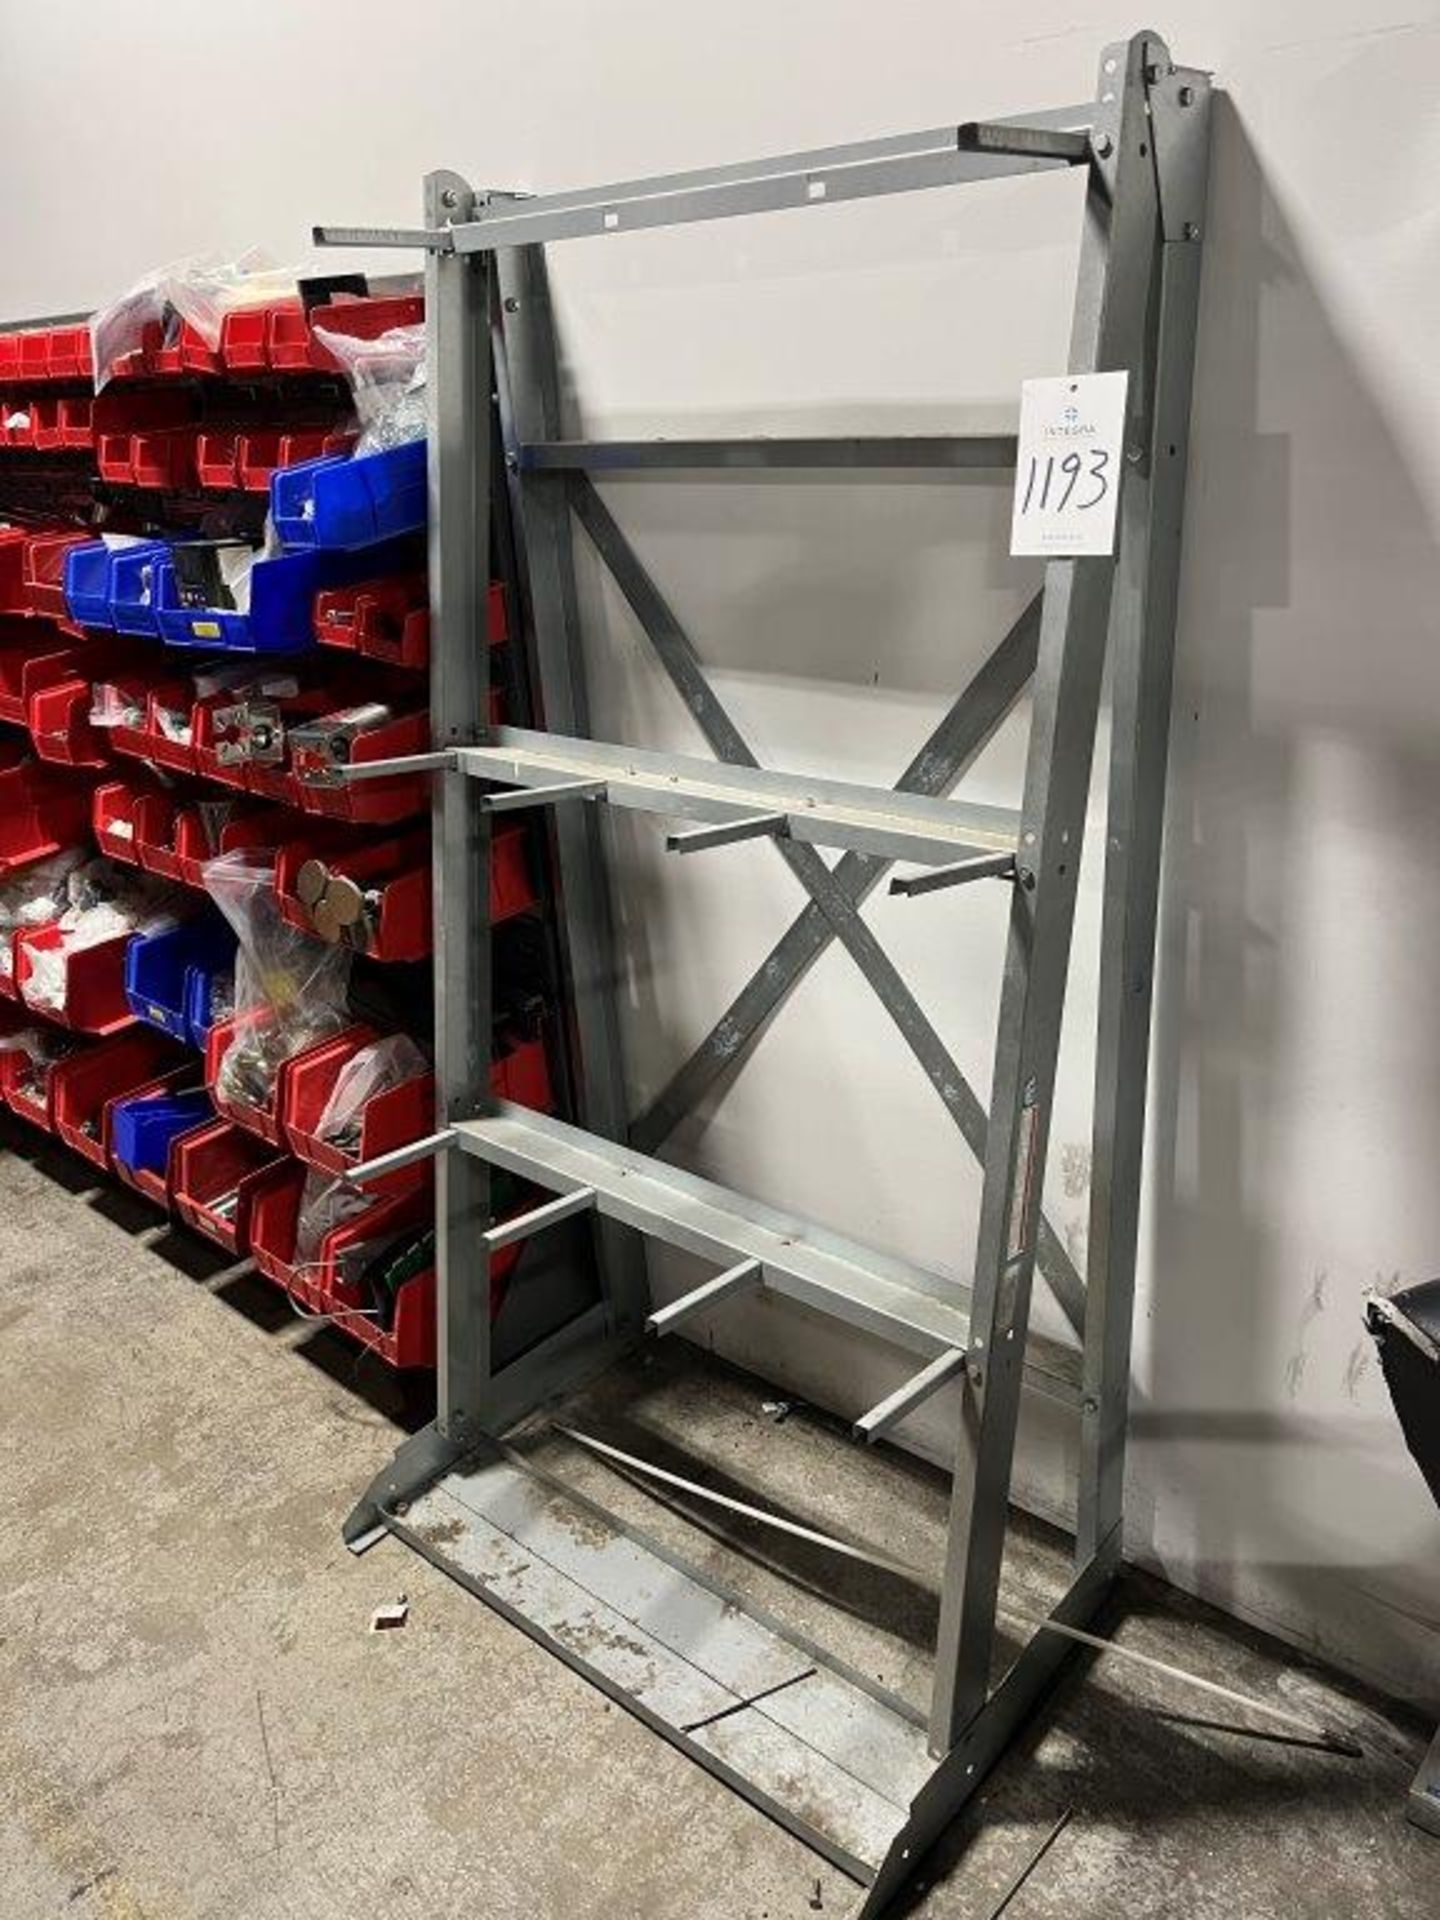 (3) Vestil 246999 Material Rack 36" x 70" with Contents - Image 2 of 2